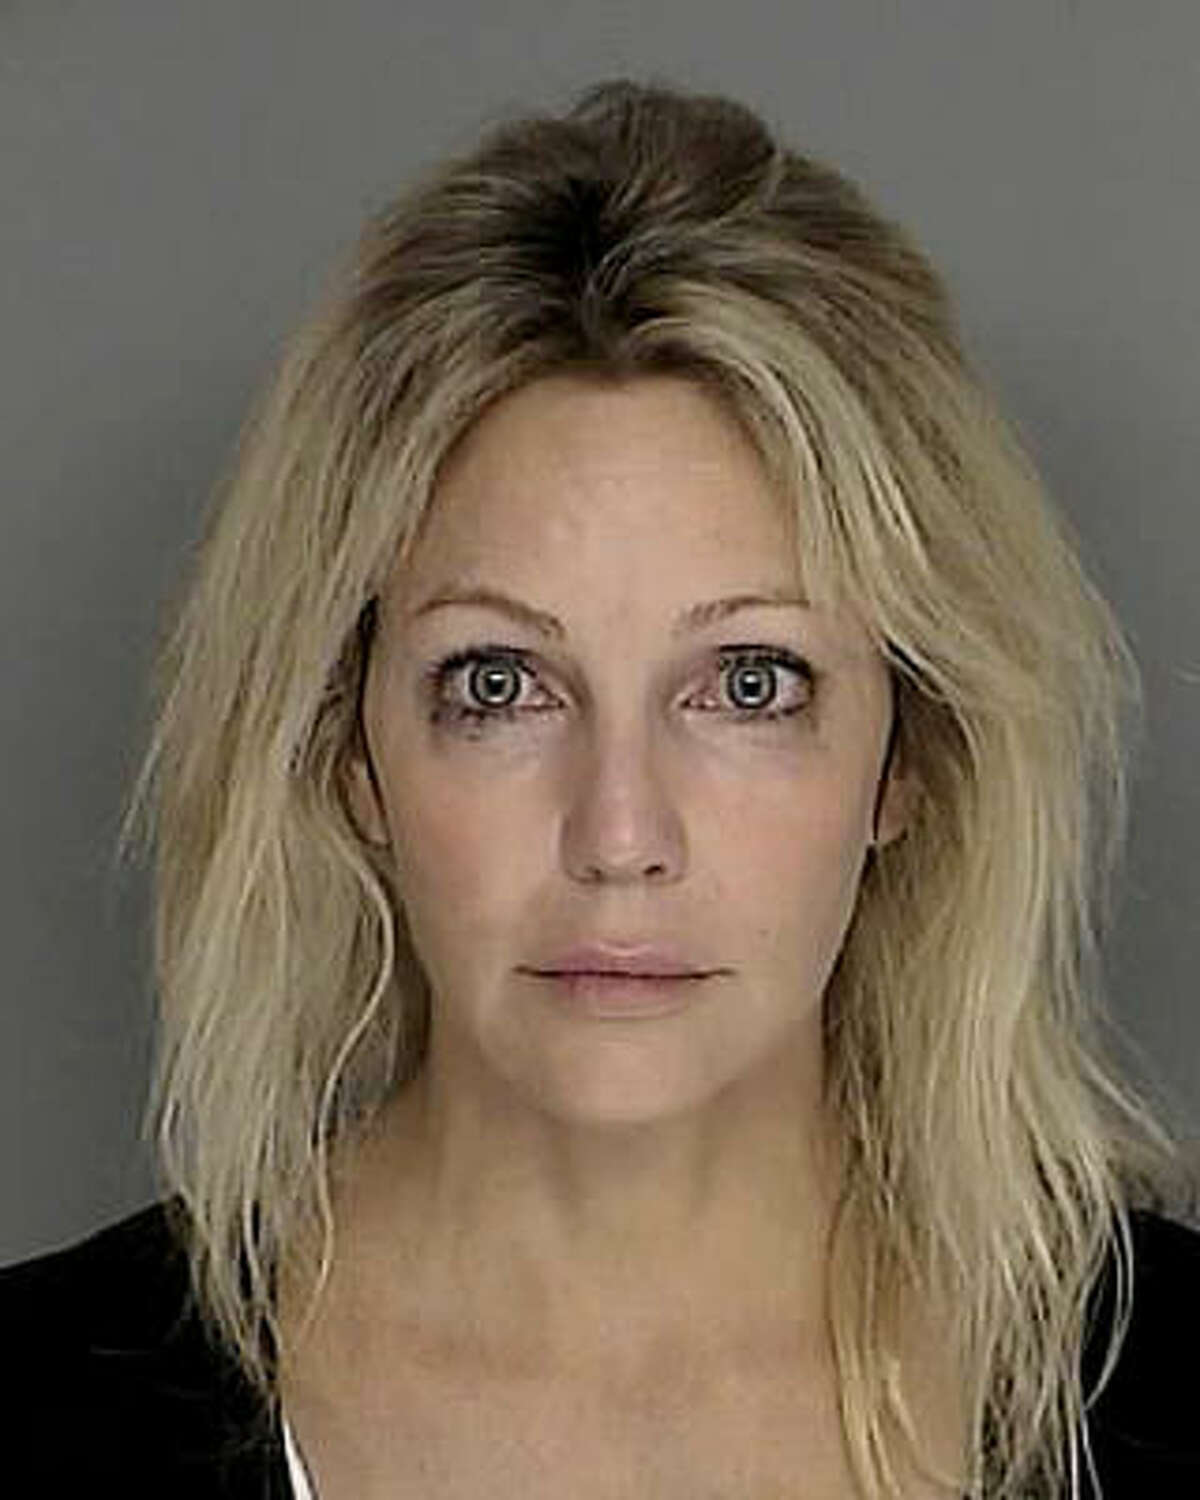 Heather Locklear Locklear was arrested after police say she was cited for hitting a no-parking sign on a public street and fleeing the scene. Locklear was still on probation after having had a previous run-in with the law back in 2008 on a DUI arrest.